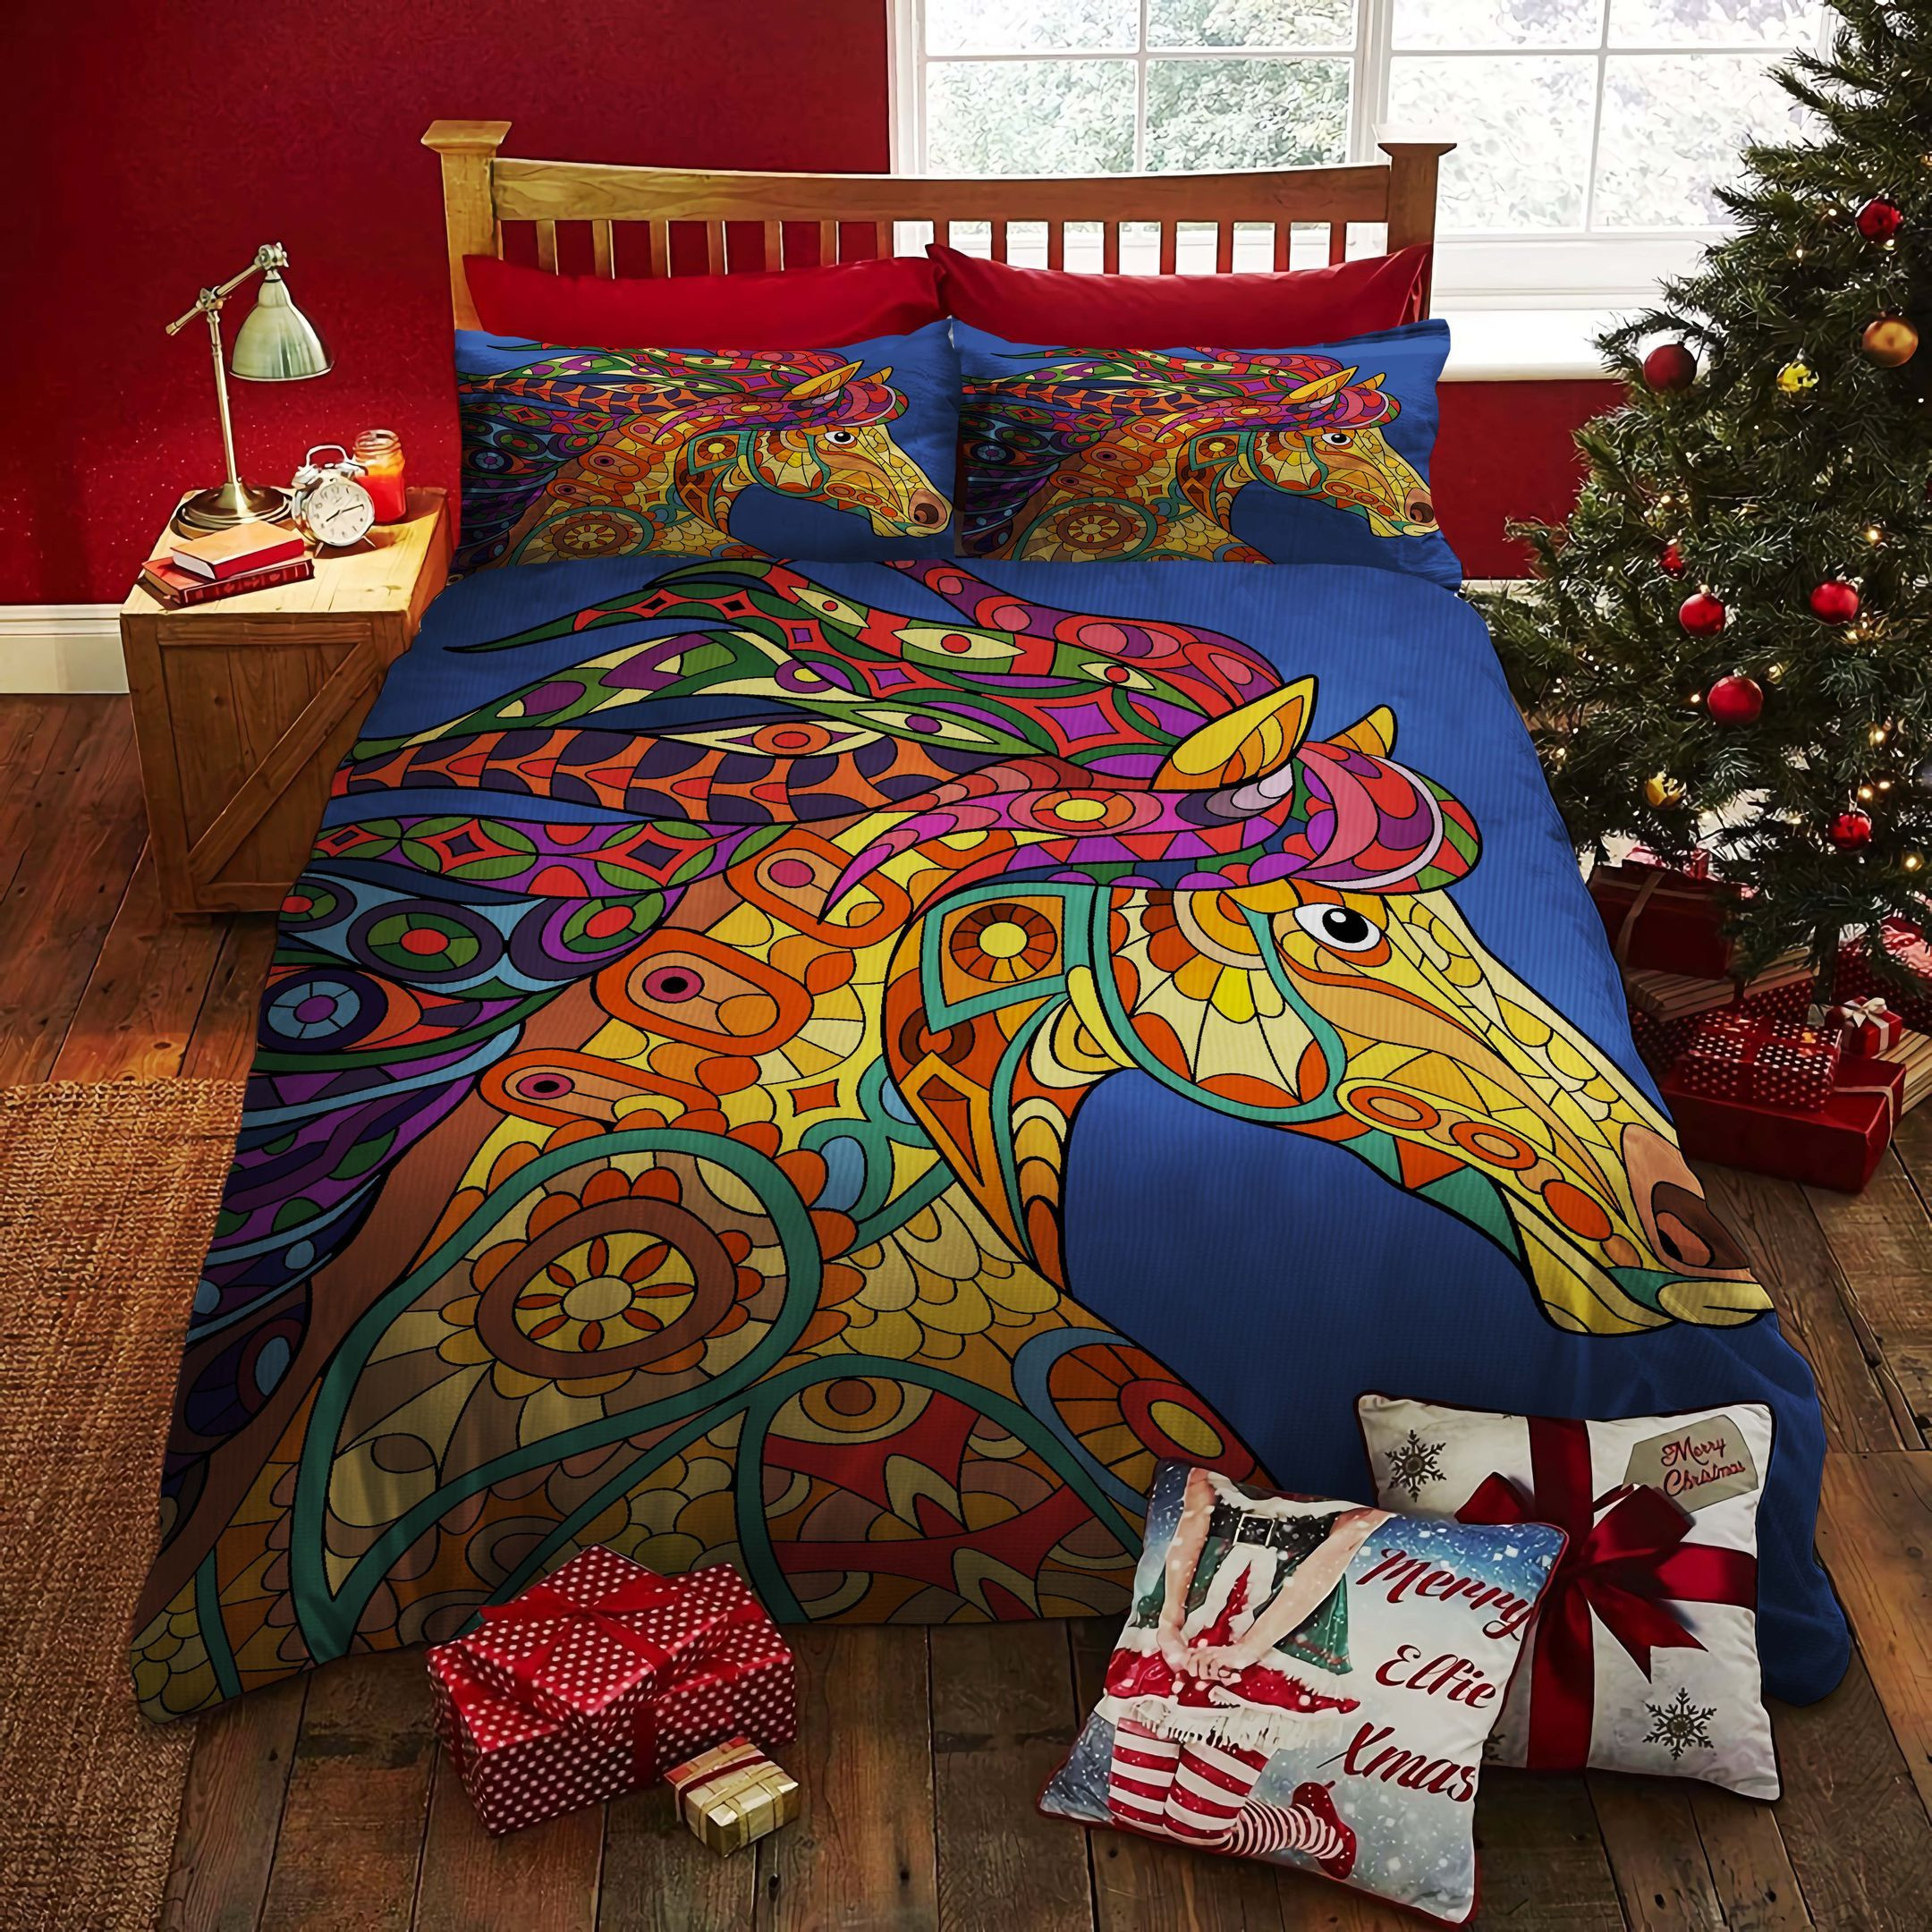 colorful horse bedding set duvet cover and sheets perfect gifts for birthdays christmas and thanksgiving e9mf3